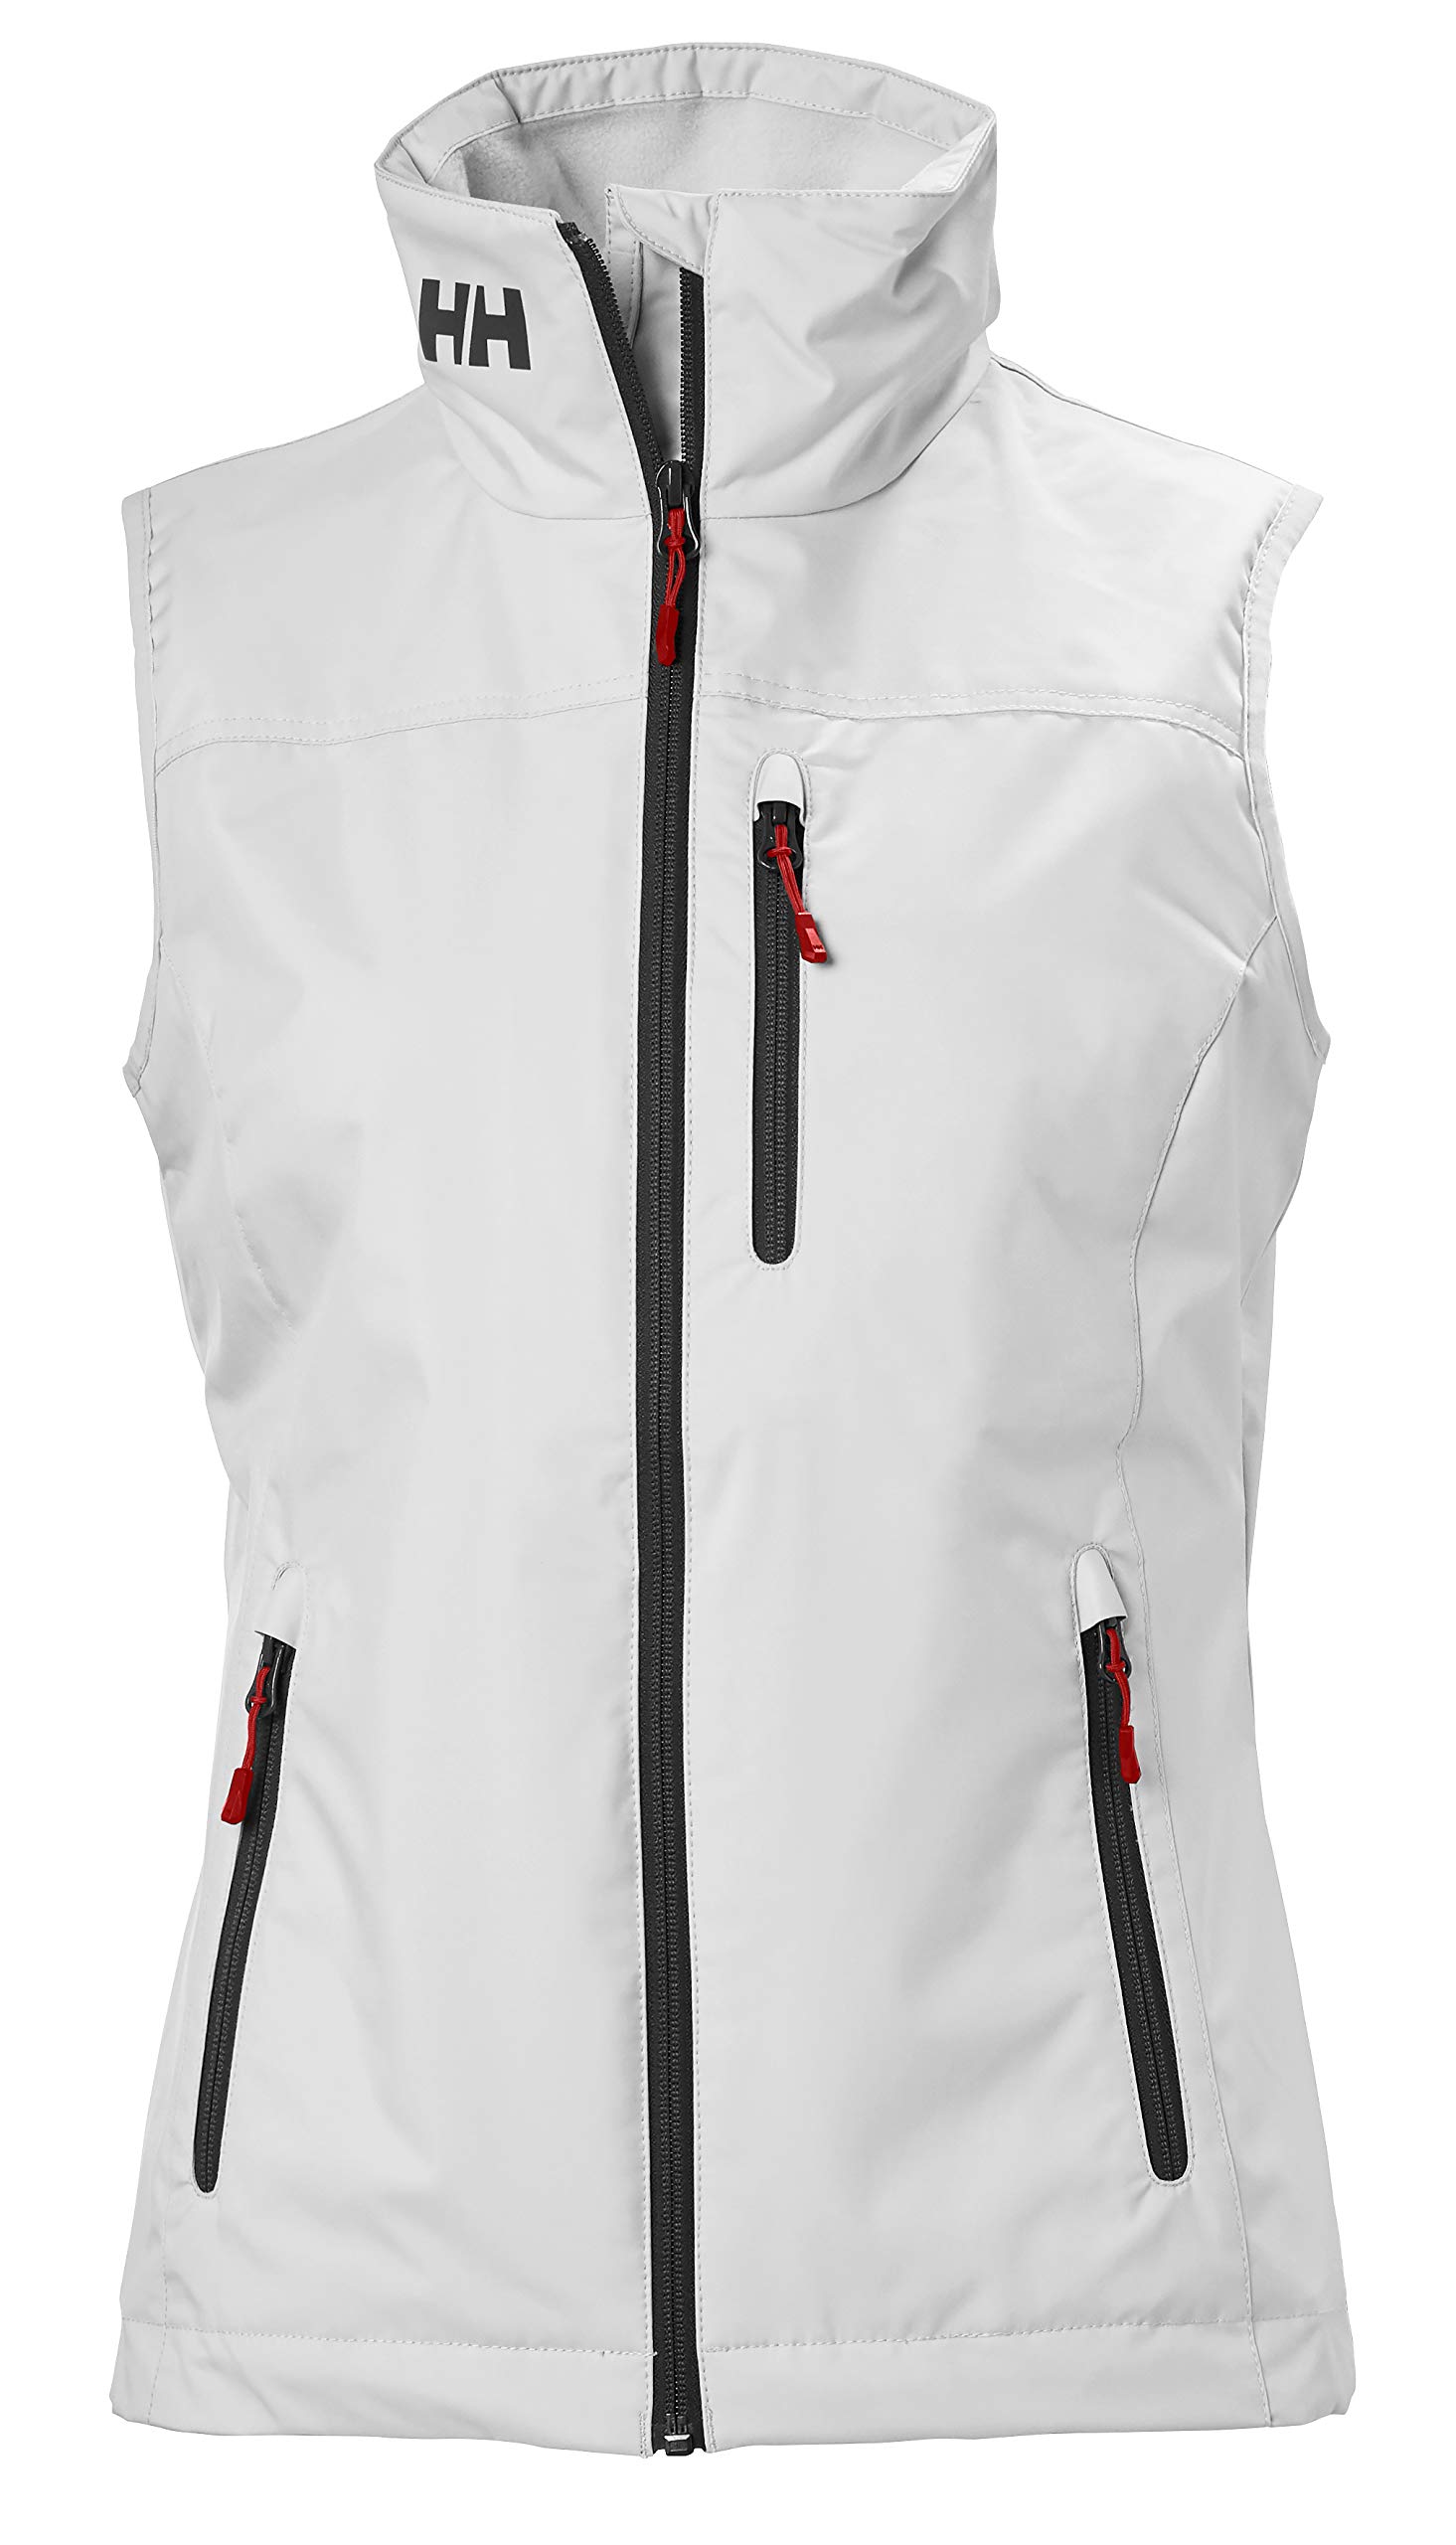 Helly Hansen Womens Crew Vest Waterproof Windproof Breathable Sailing Vest 001 White XXX-Large